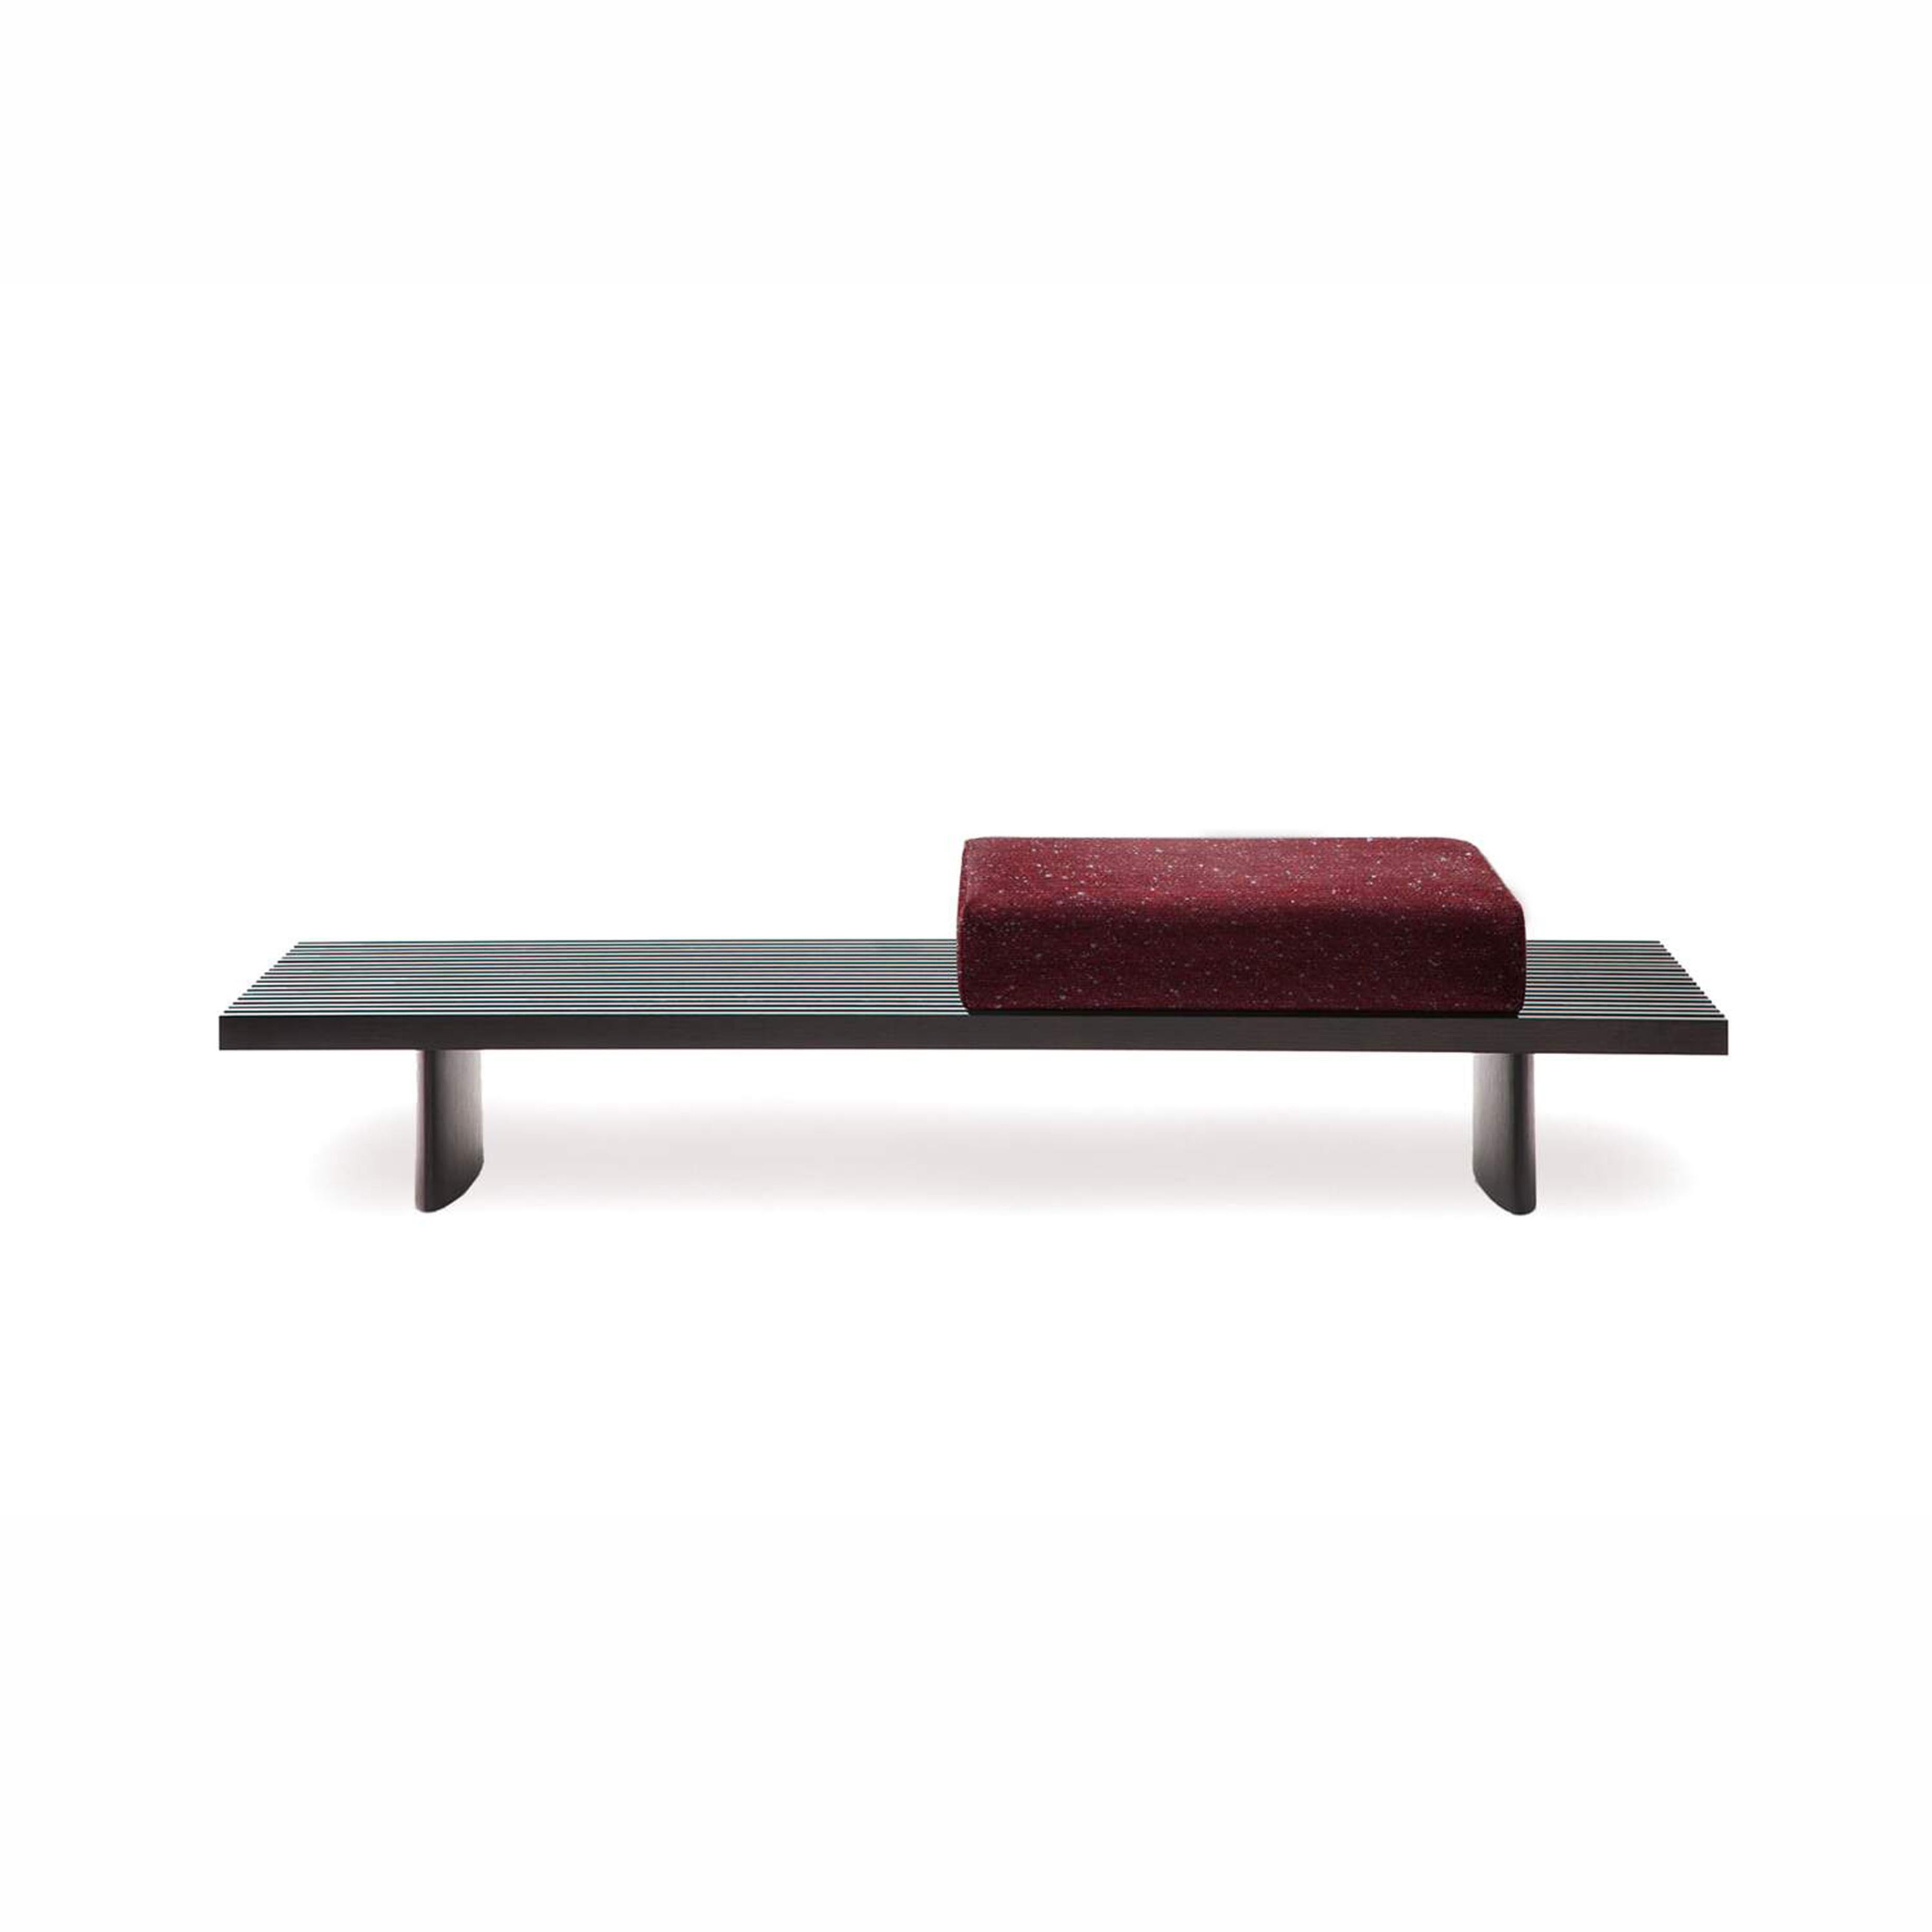 Modular system that can be use as a sofa, bench or other options designed by Charlotte Perriand in 1953. Relaunched by Cassina in 2004. 
Manufactured by Cassina in Italy.

A modular system featuring simple, essential volumes, Refolo was created